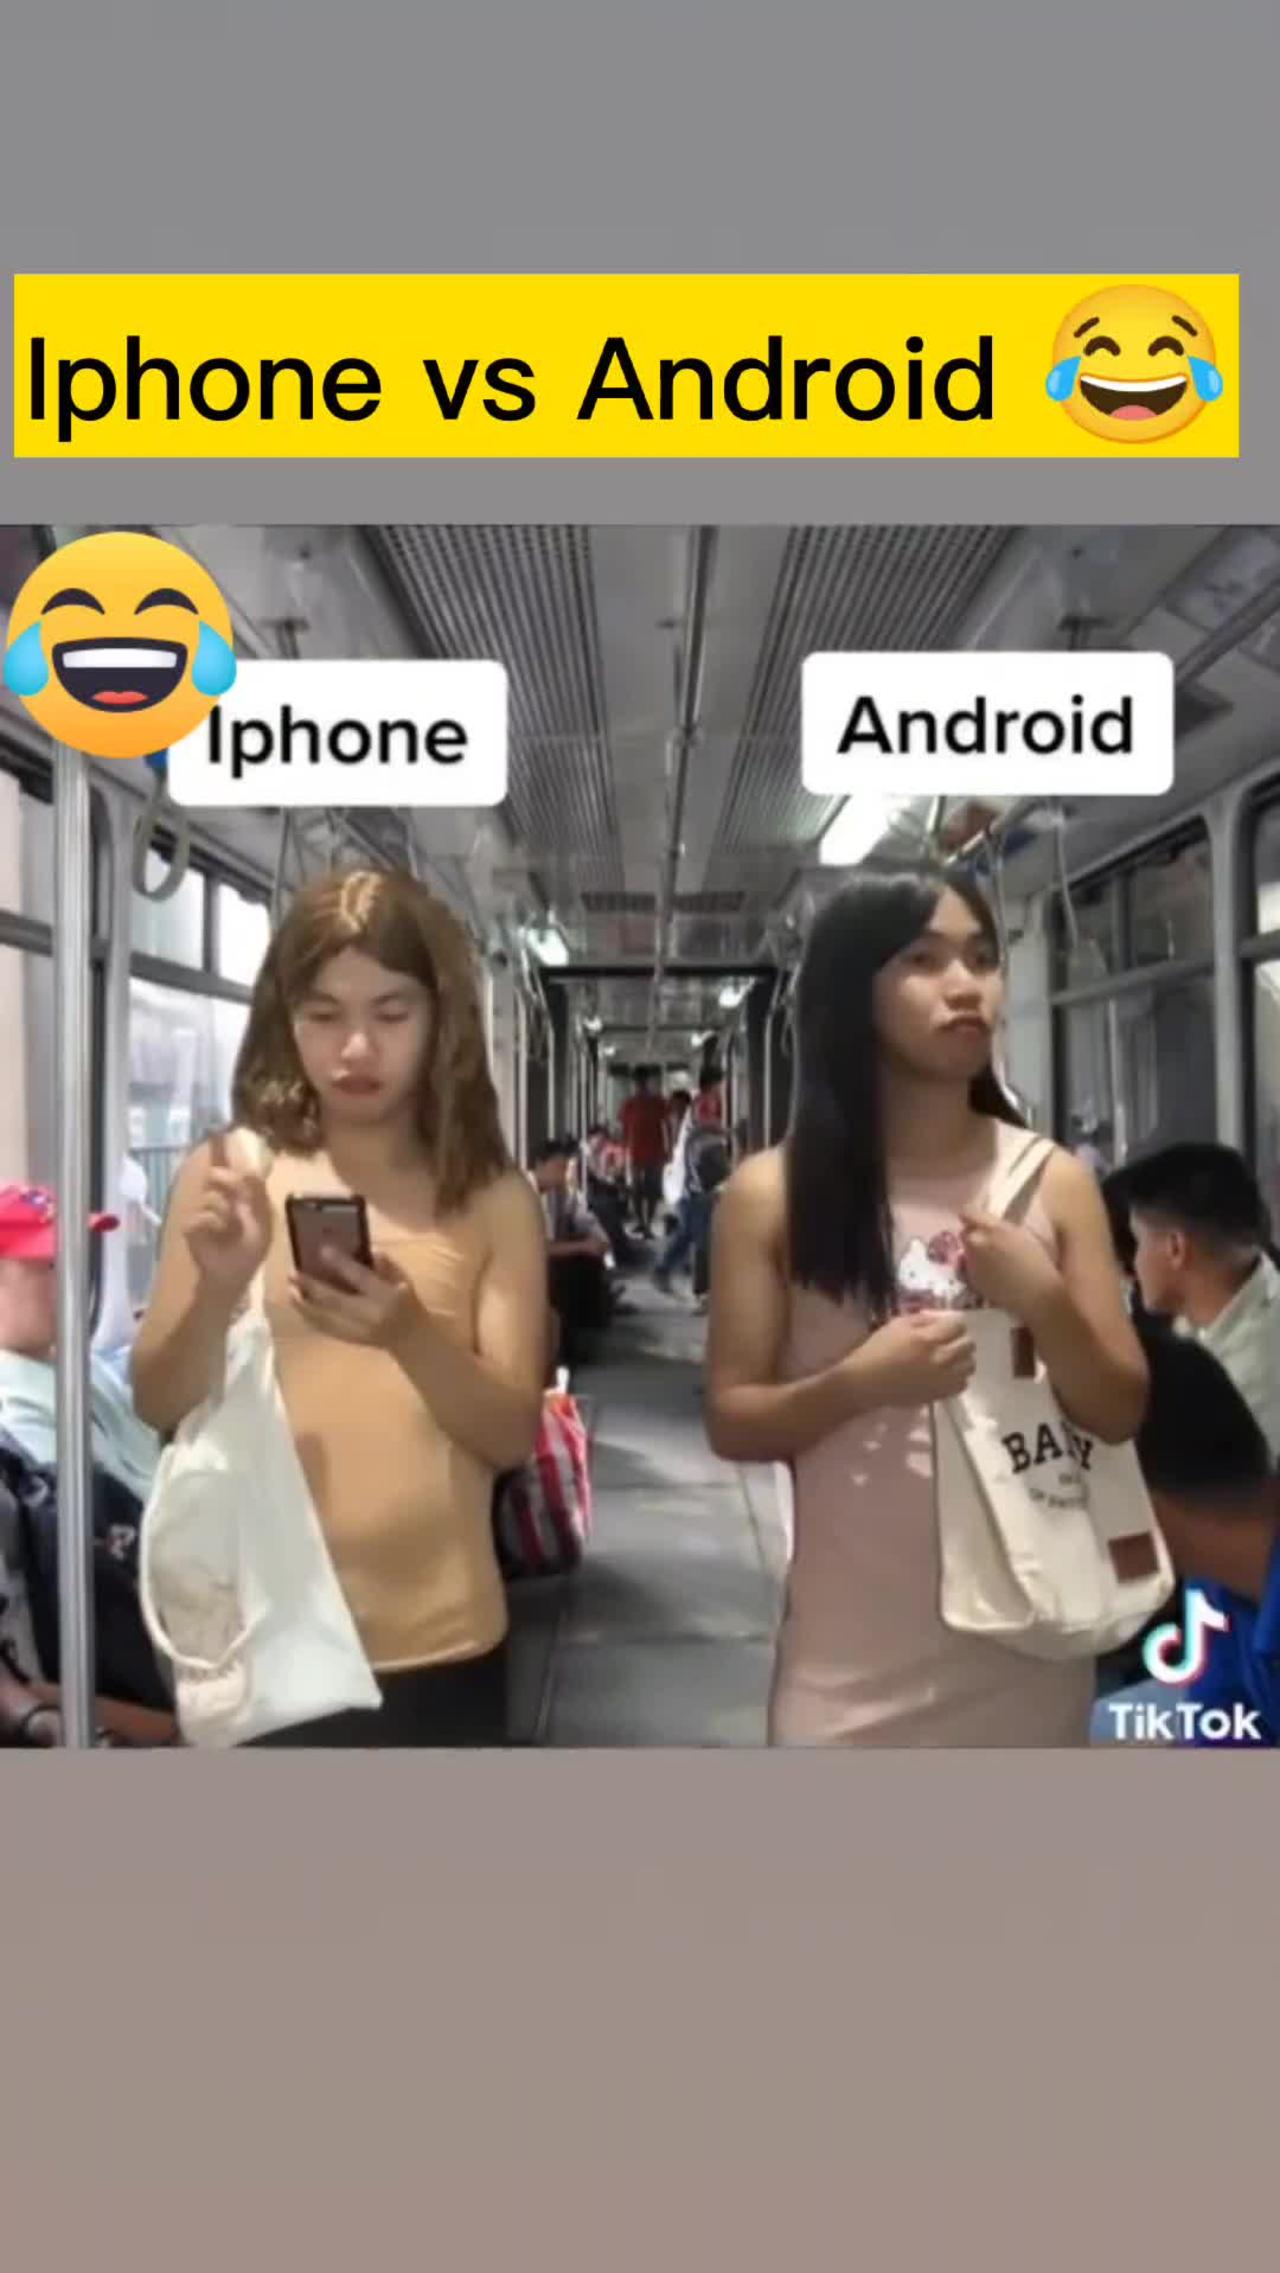 Iphone vs Android 😂😂🤣